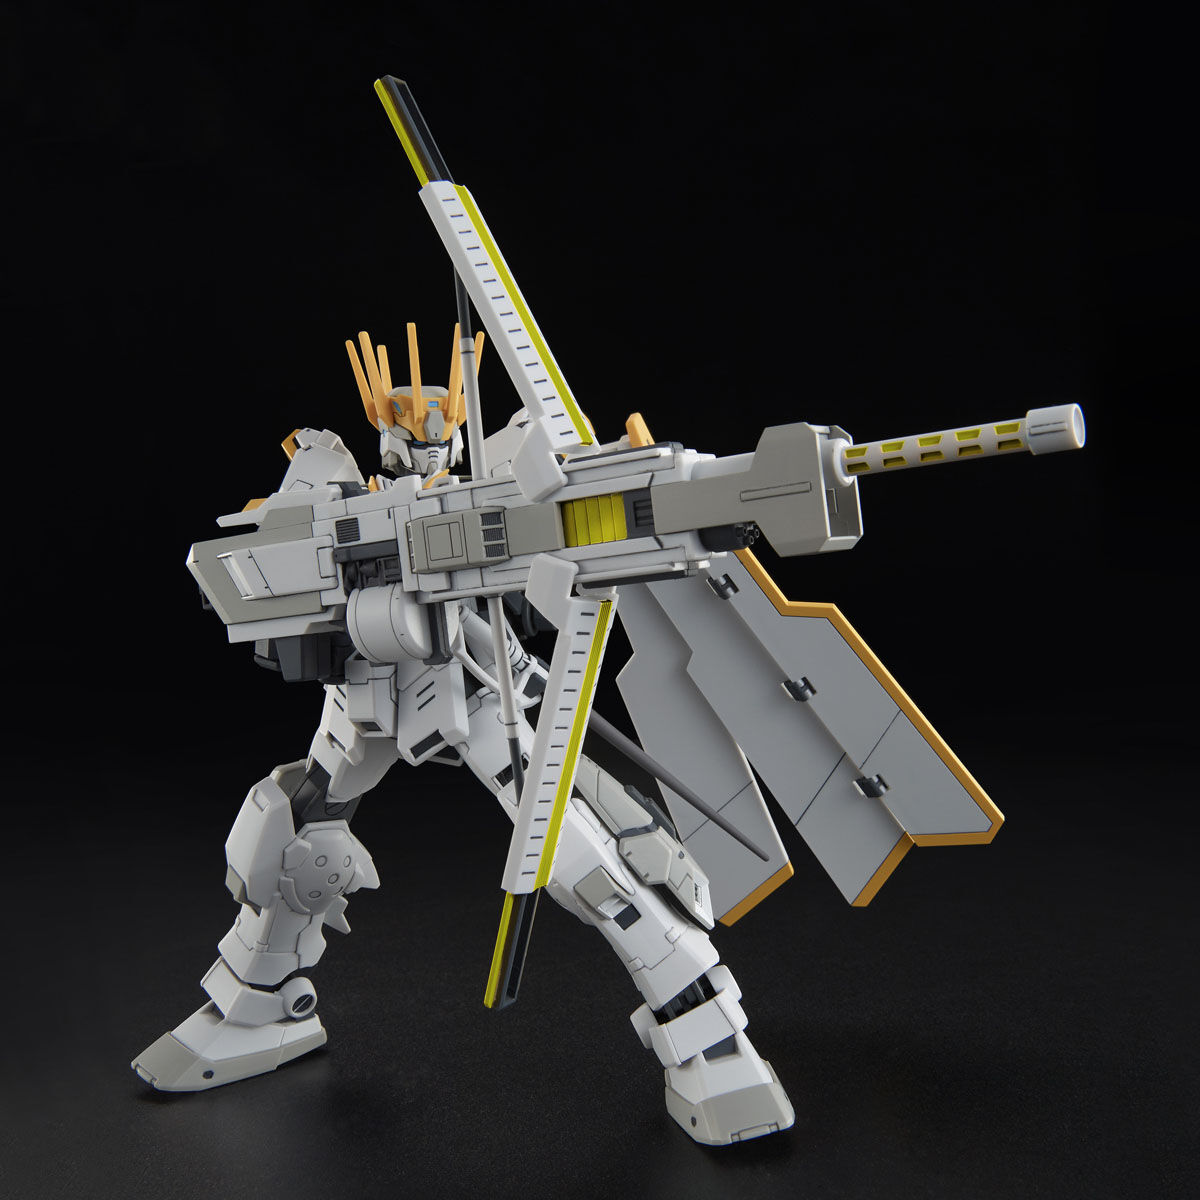 HG 1/144 WHITE RIDER [Mar 2022 Delivery]